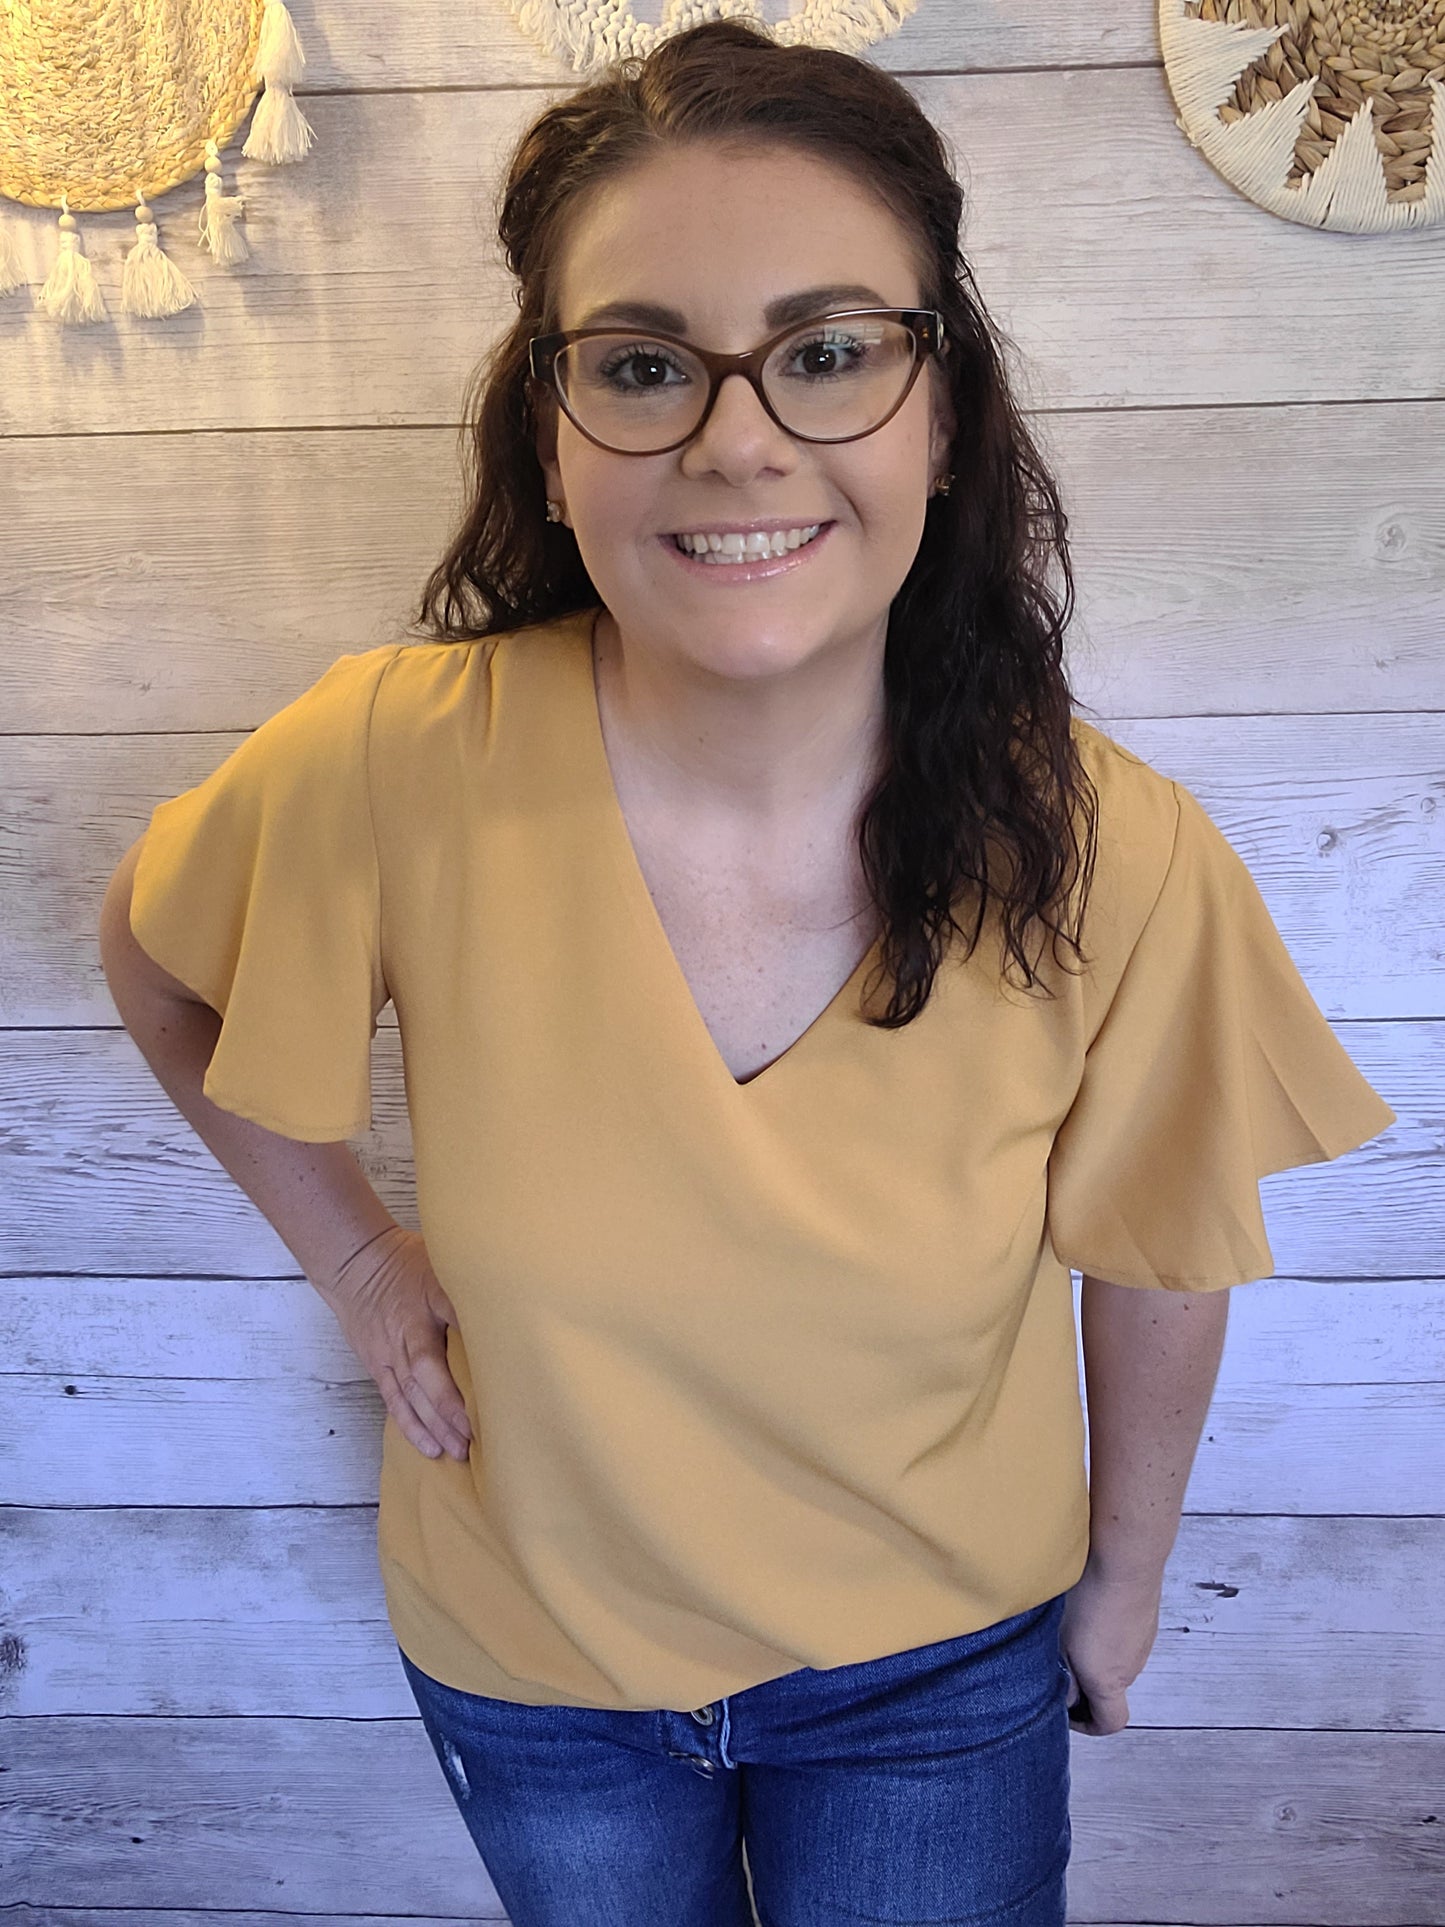 Harvest some style in this Dandelion Fields Golden Mustard Top! Featuring a woven flutter sleeve v-neck - it's the perfect outfit choice to spice up any look! Guaranteed to make you stand out like a ray of sunshine. Sizes small through x-large.